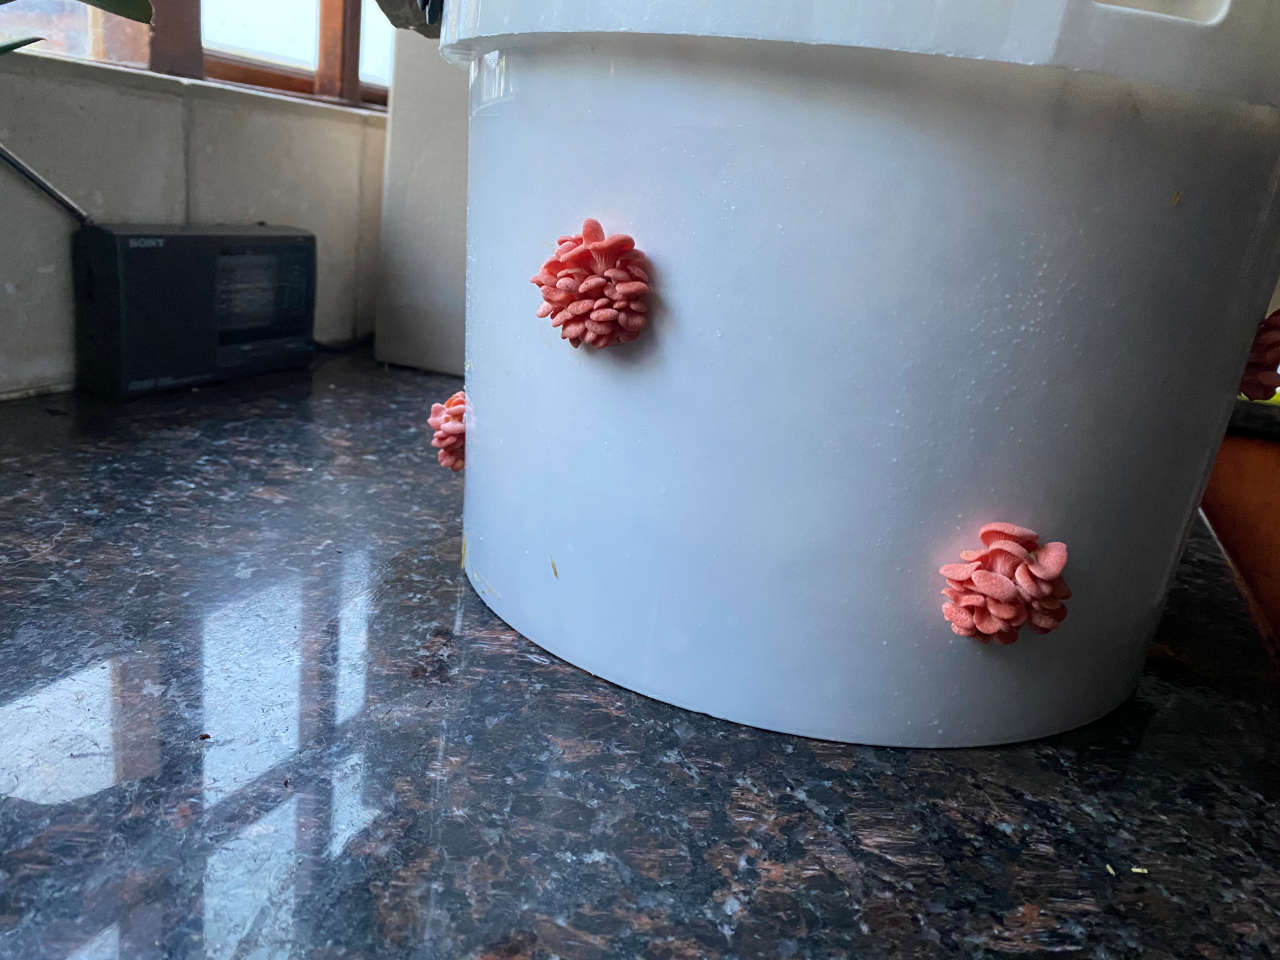 A bucket on a kitchen counter top sprouting pink oyster mushrooms